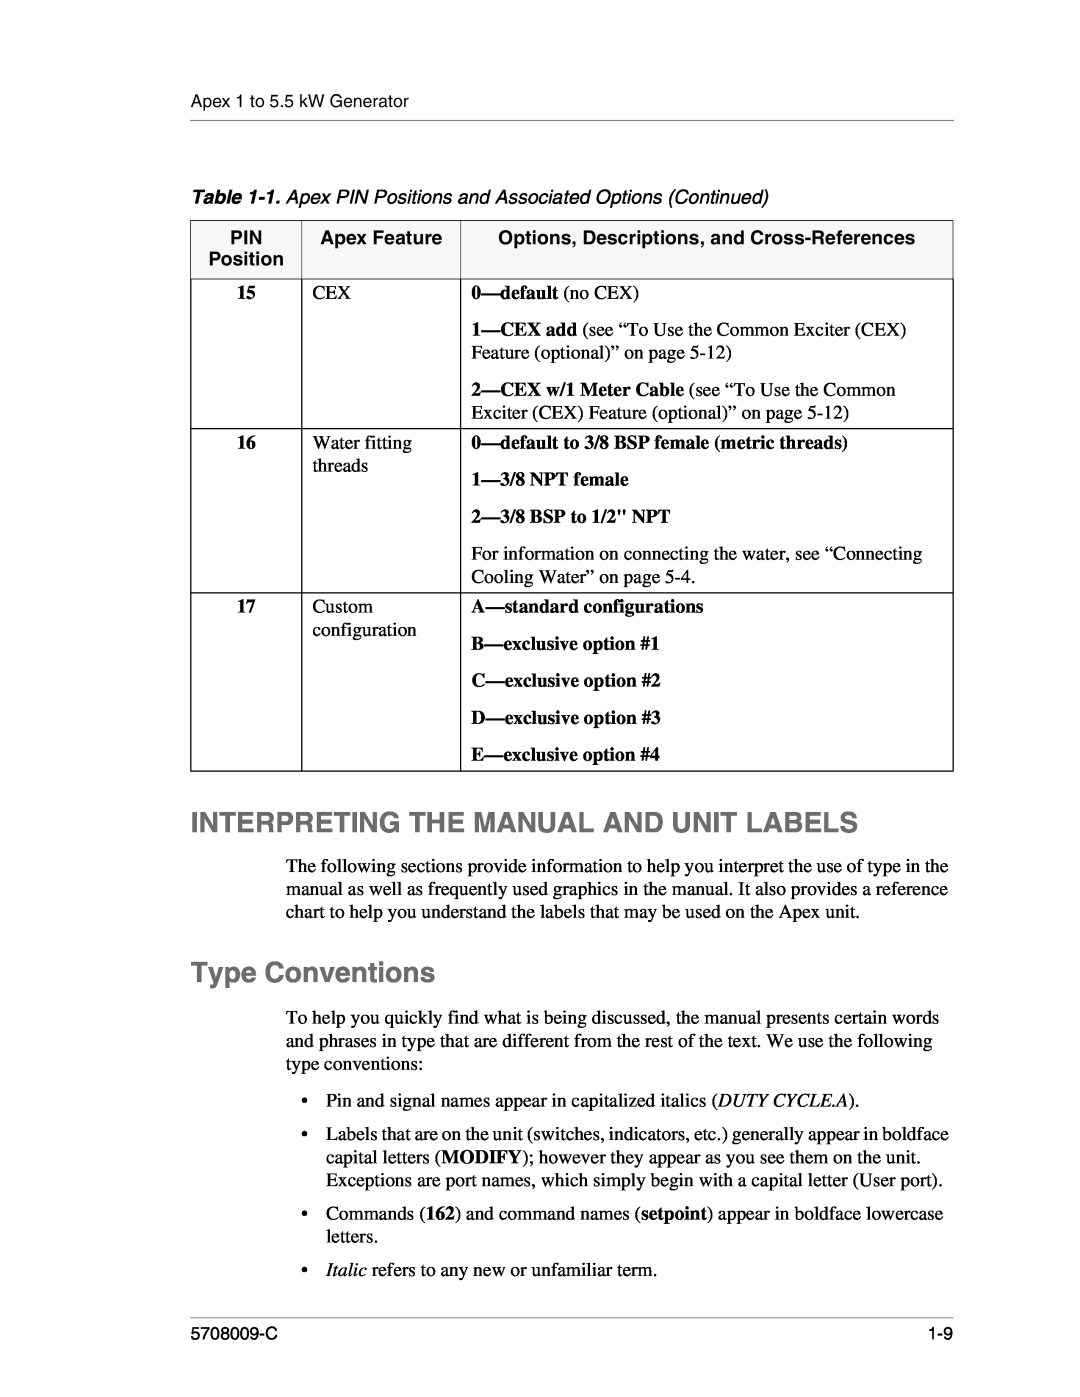 Apex Digital 5708009-C manual Interpreting The Manual And Unit Labels, Type Conventions 